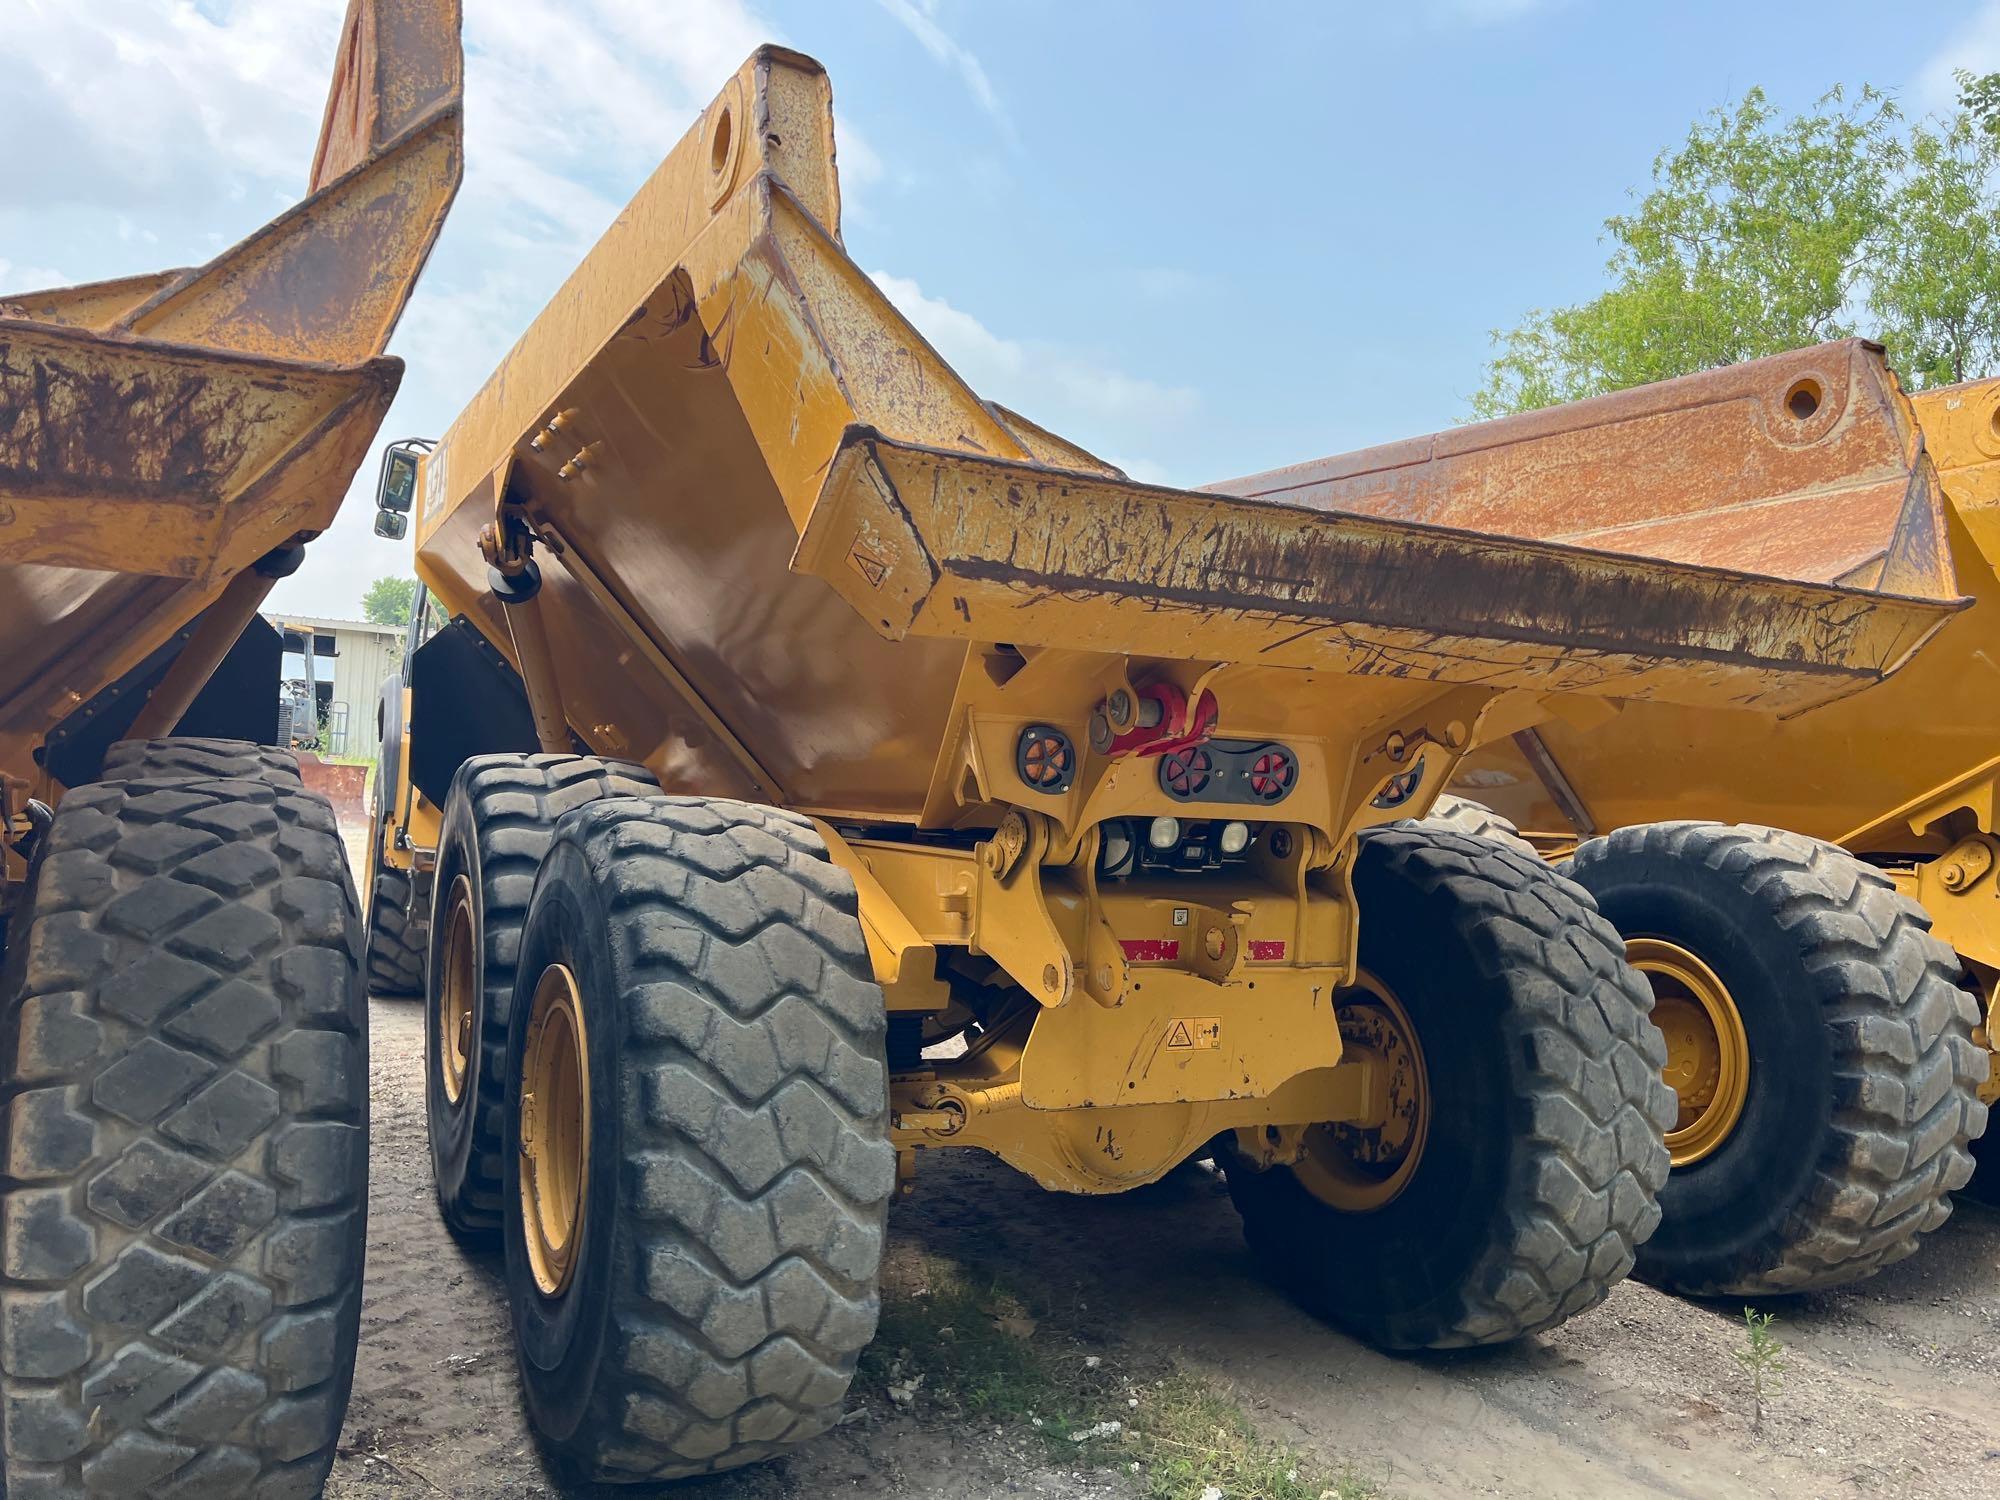 2017 BELL B30E ARTICULATED HAUL TRUCK SN:2007778 6x6, powered by diesel engine, equipped with Cab,